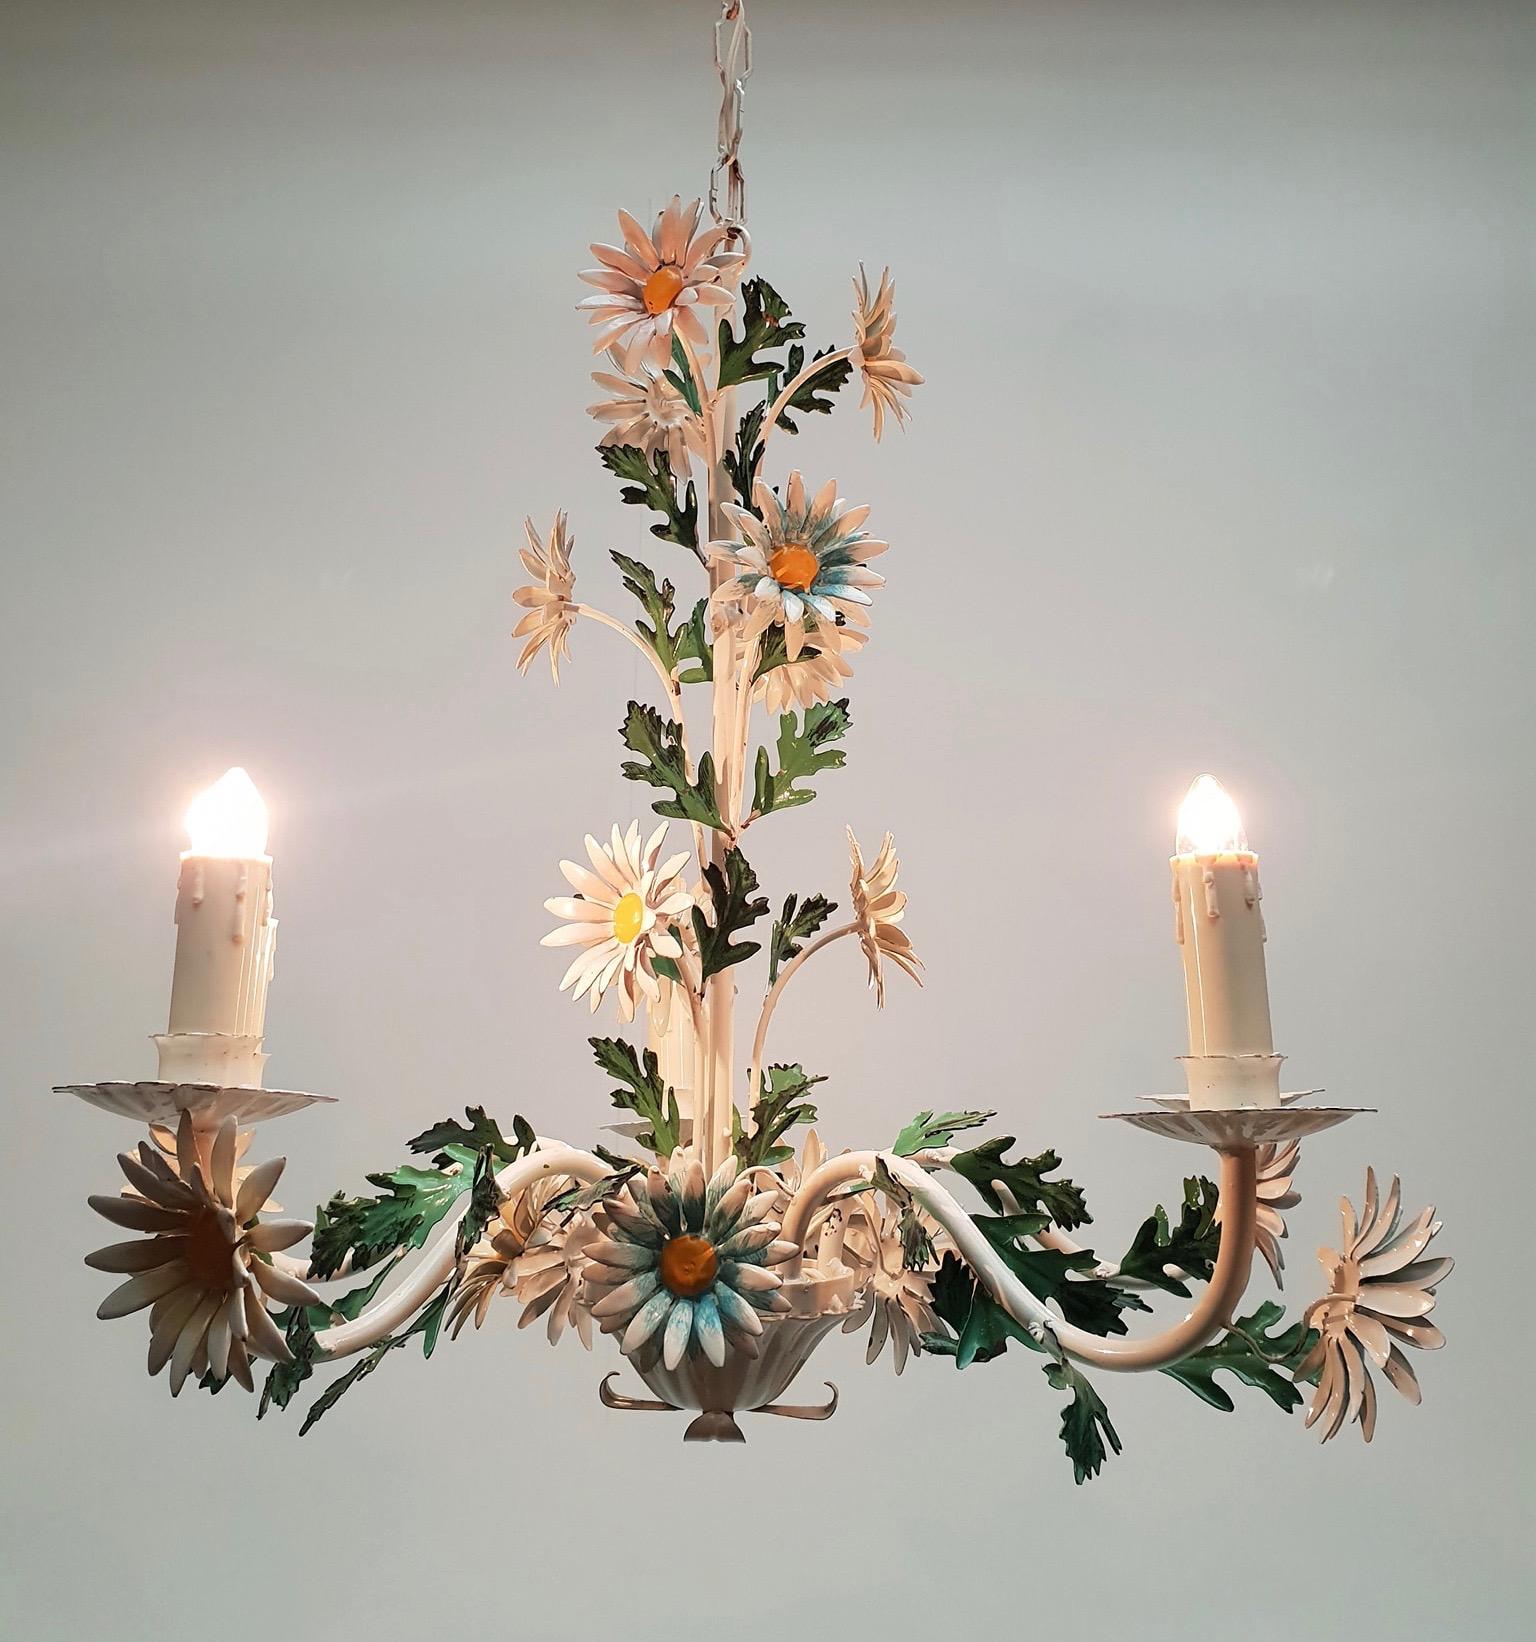 Mid-20th Century Italian Painted Iron and Tole Chandelier with Flowers (20. Jahrhundert)